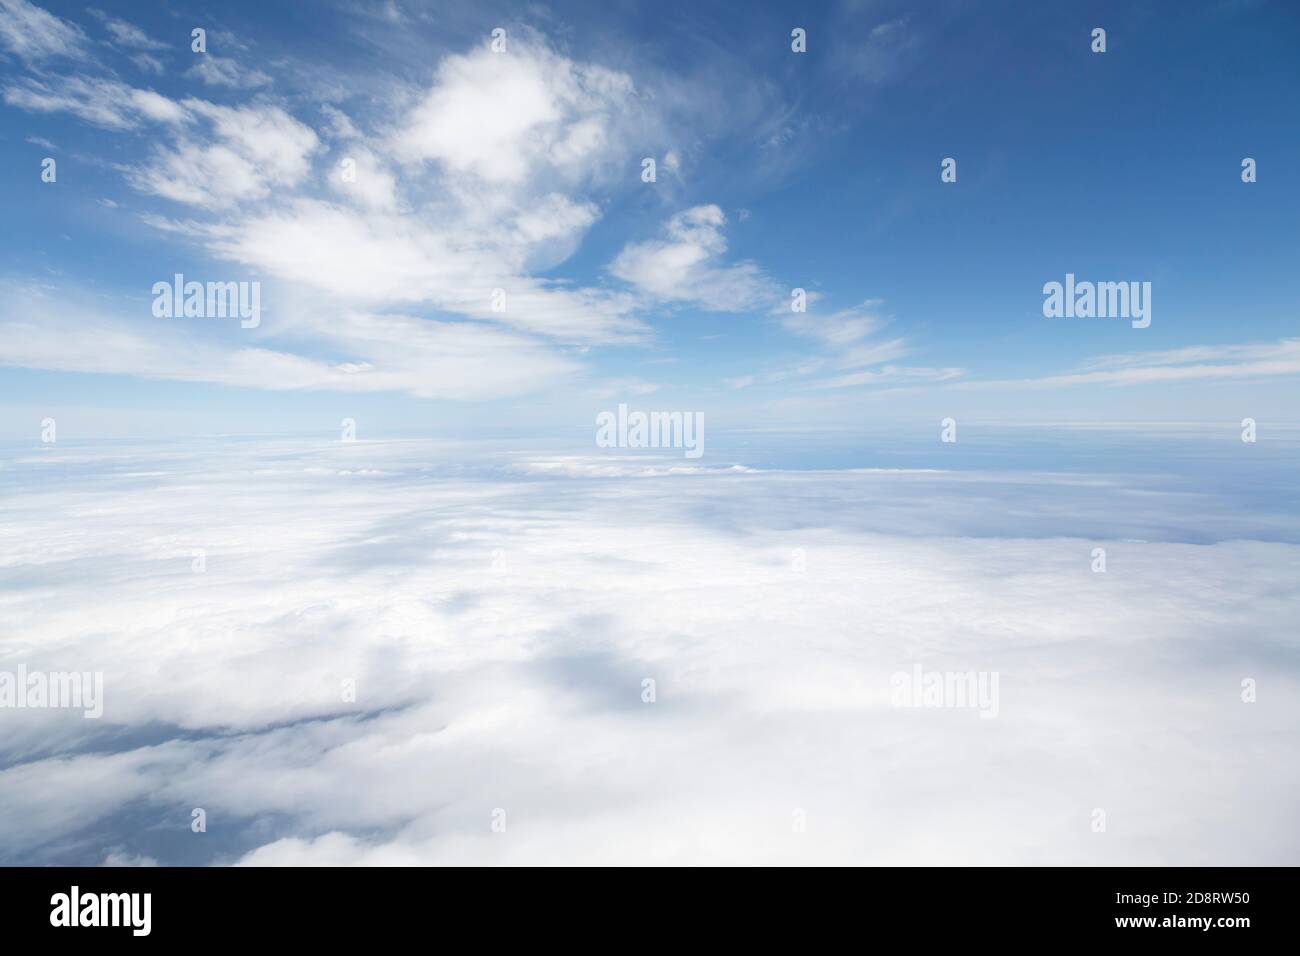 Aerial view flying above clouds. Depicts heaven and Earth concept and the environment Stock Photo